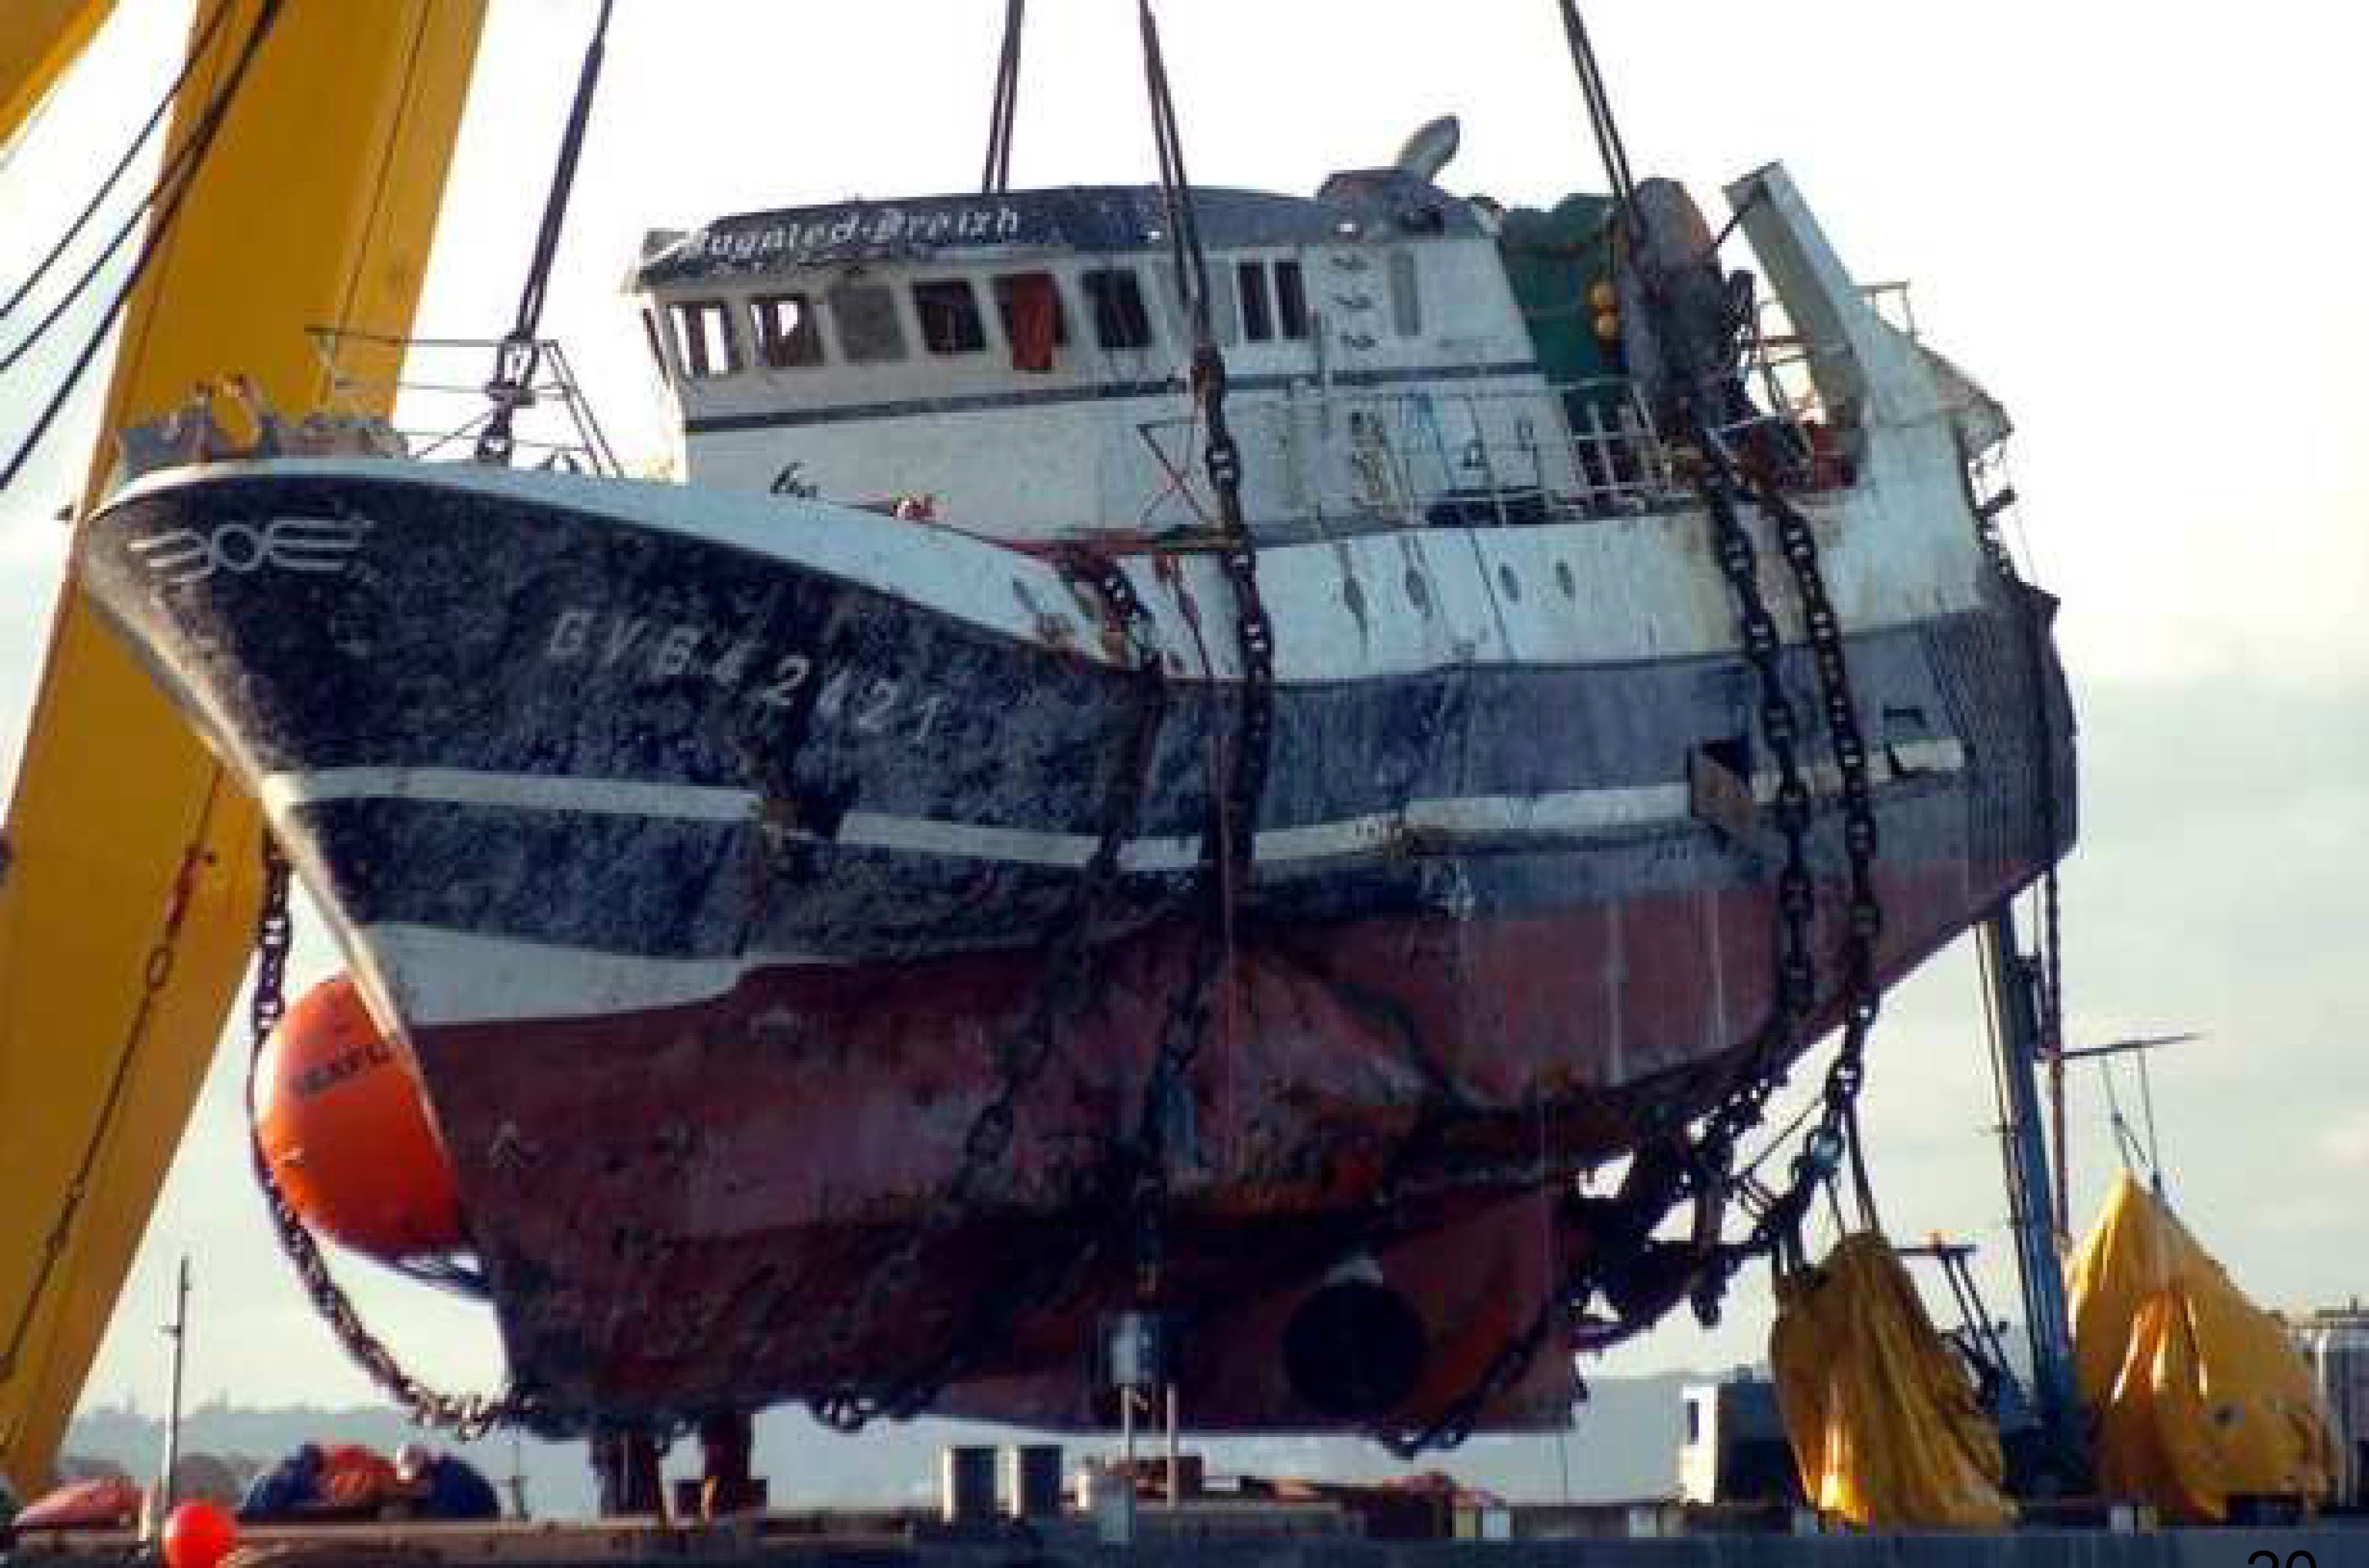 Wreckage of the Bugaled Breizh trawler, which sank in 2004.